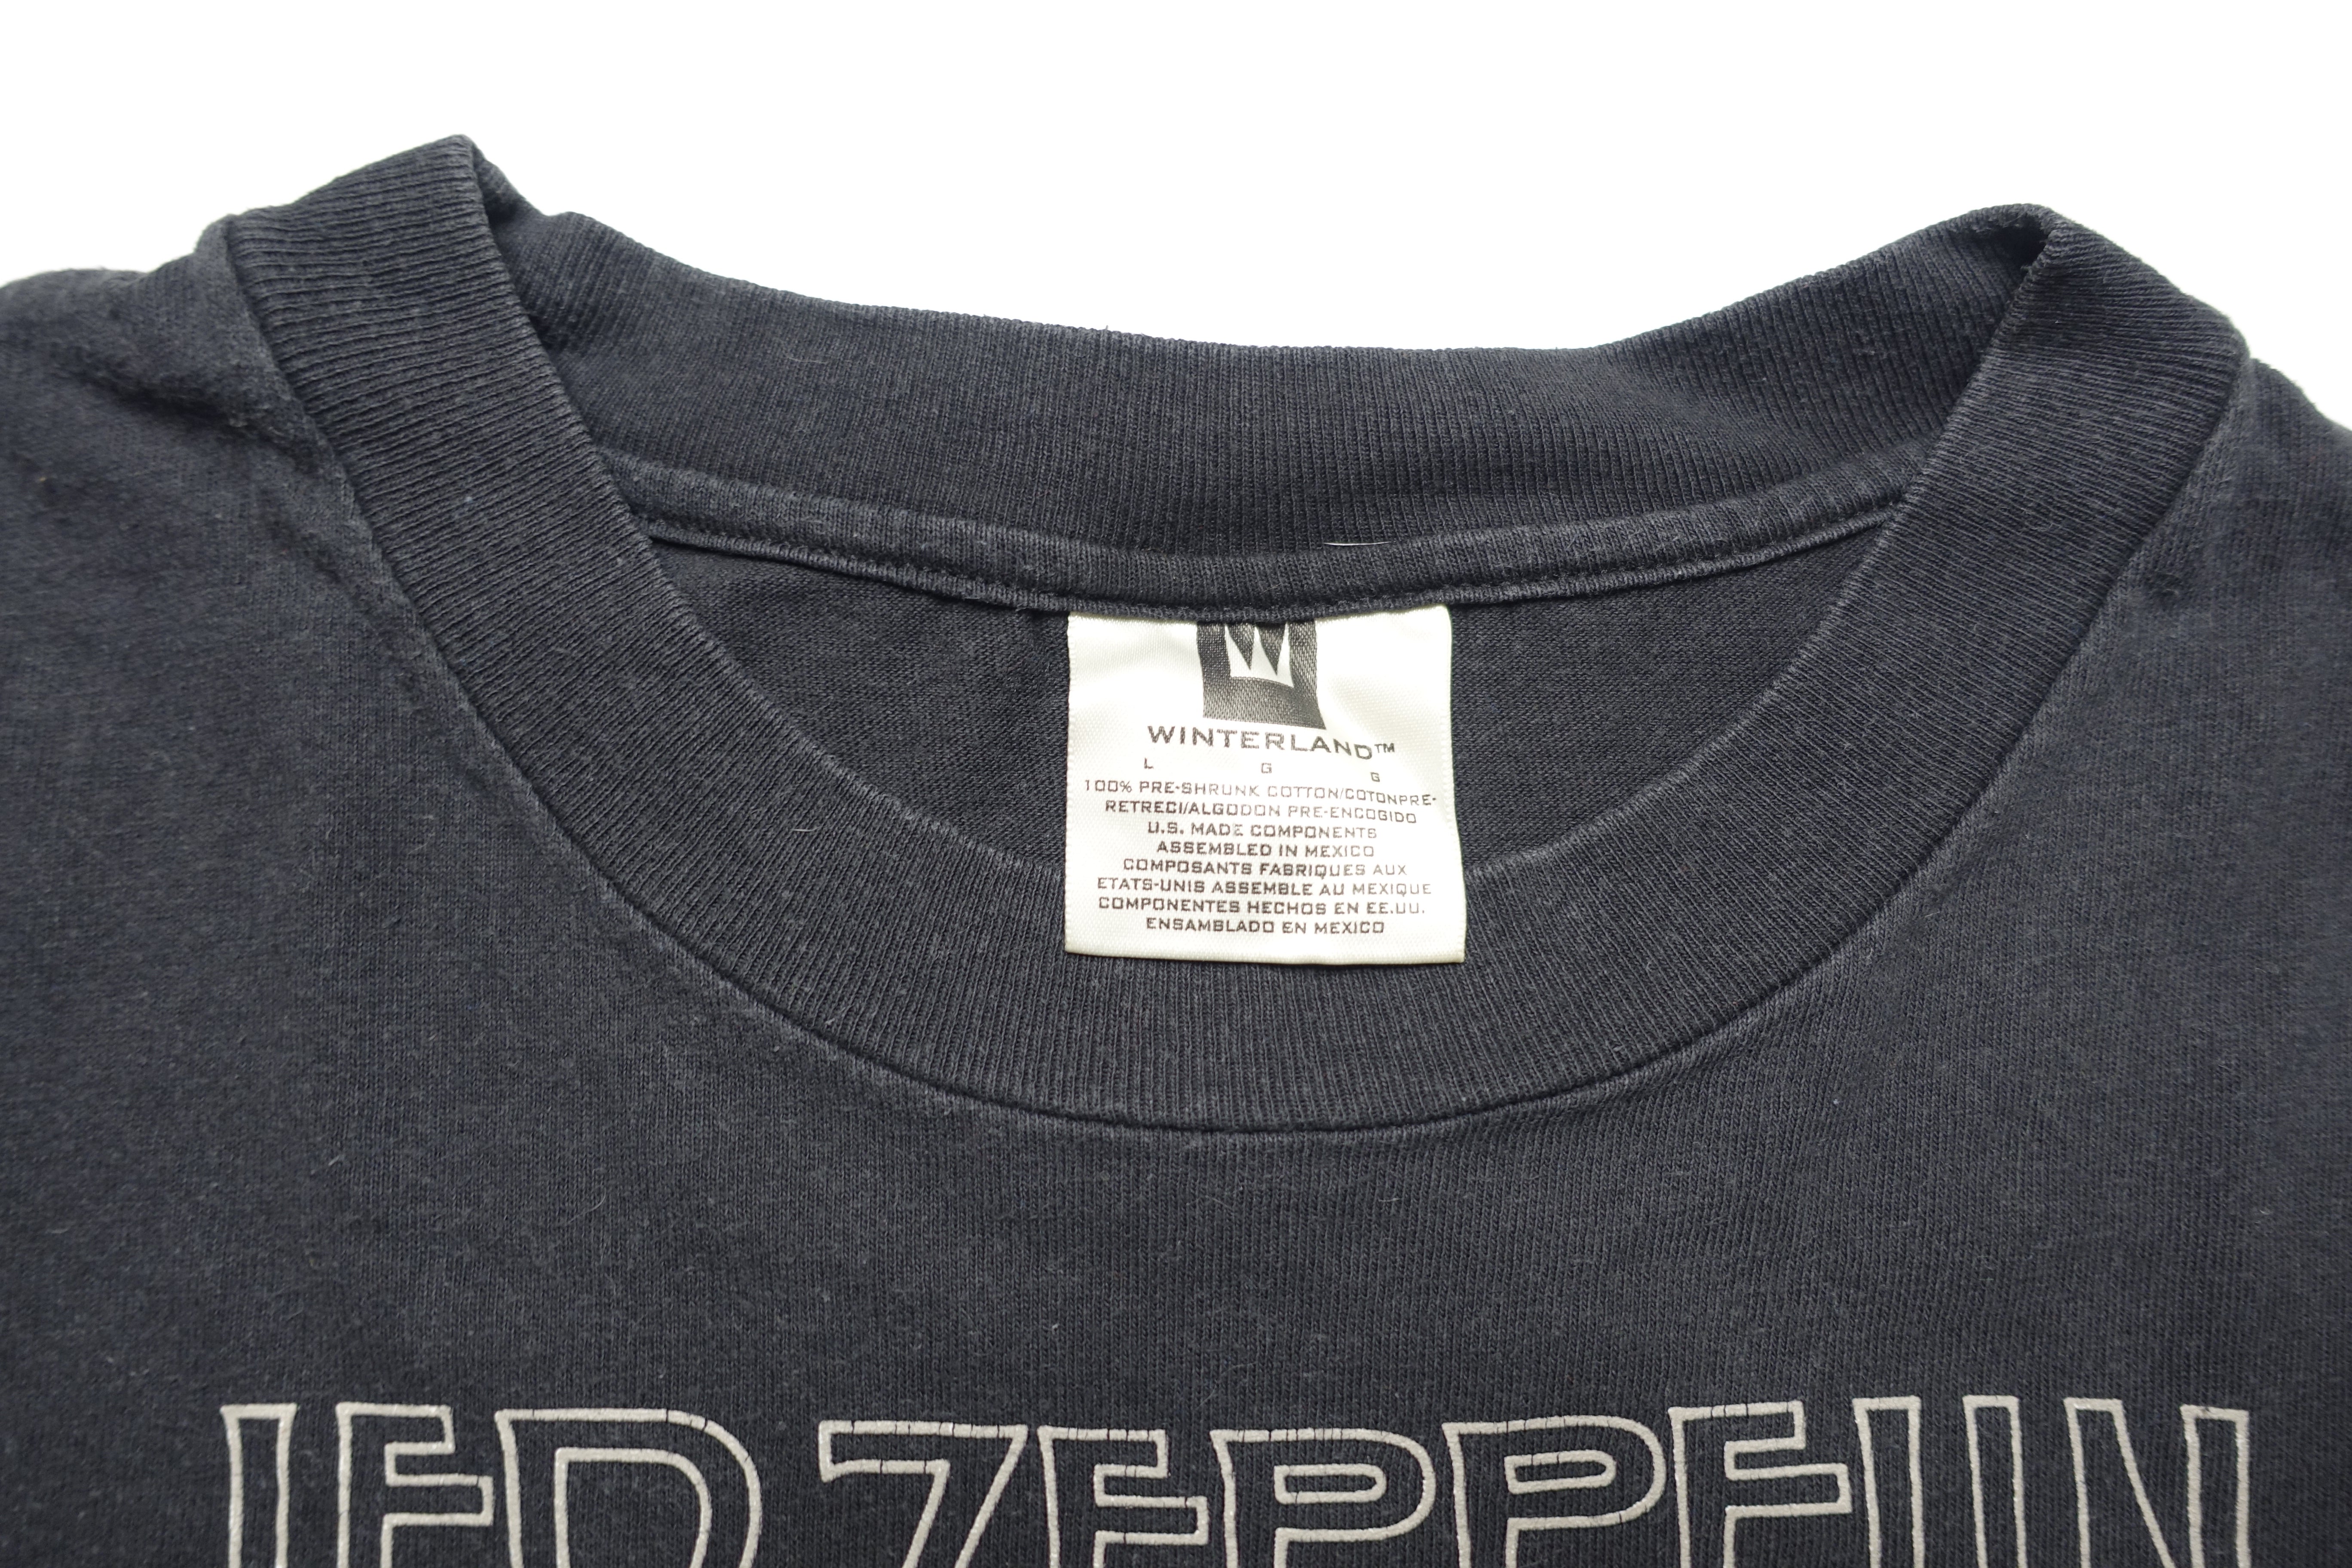 Led Zeppelin - Song Remains The Same Winterland Shirt Size Large